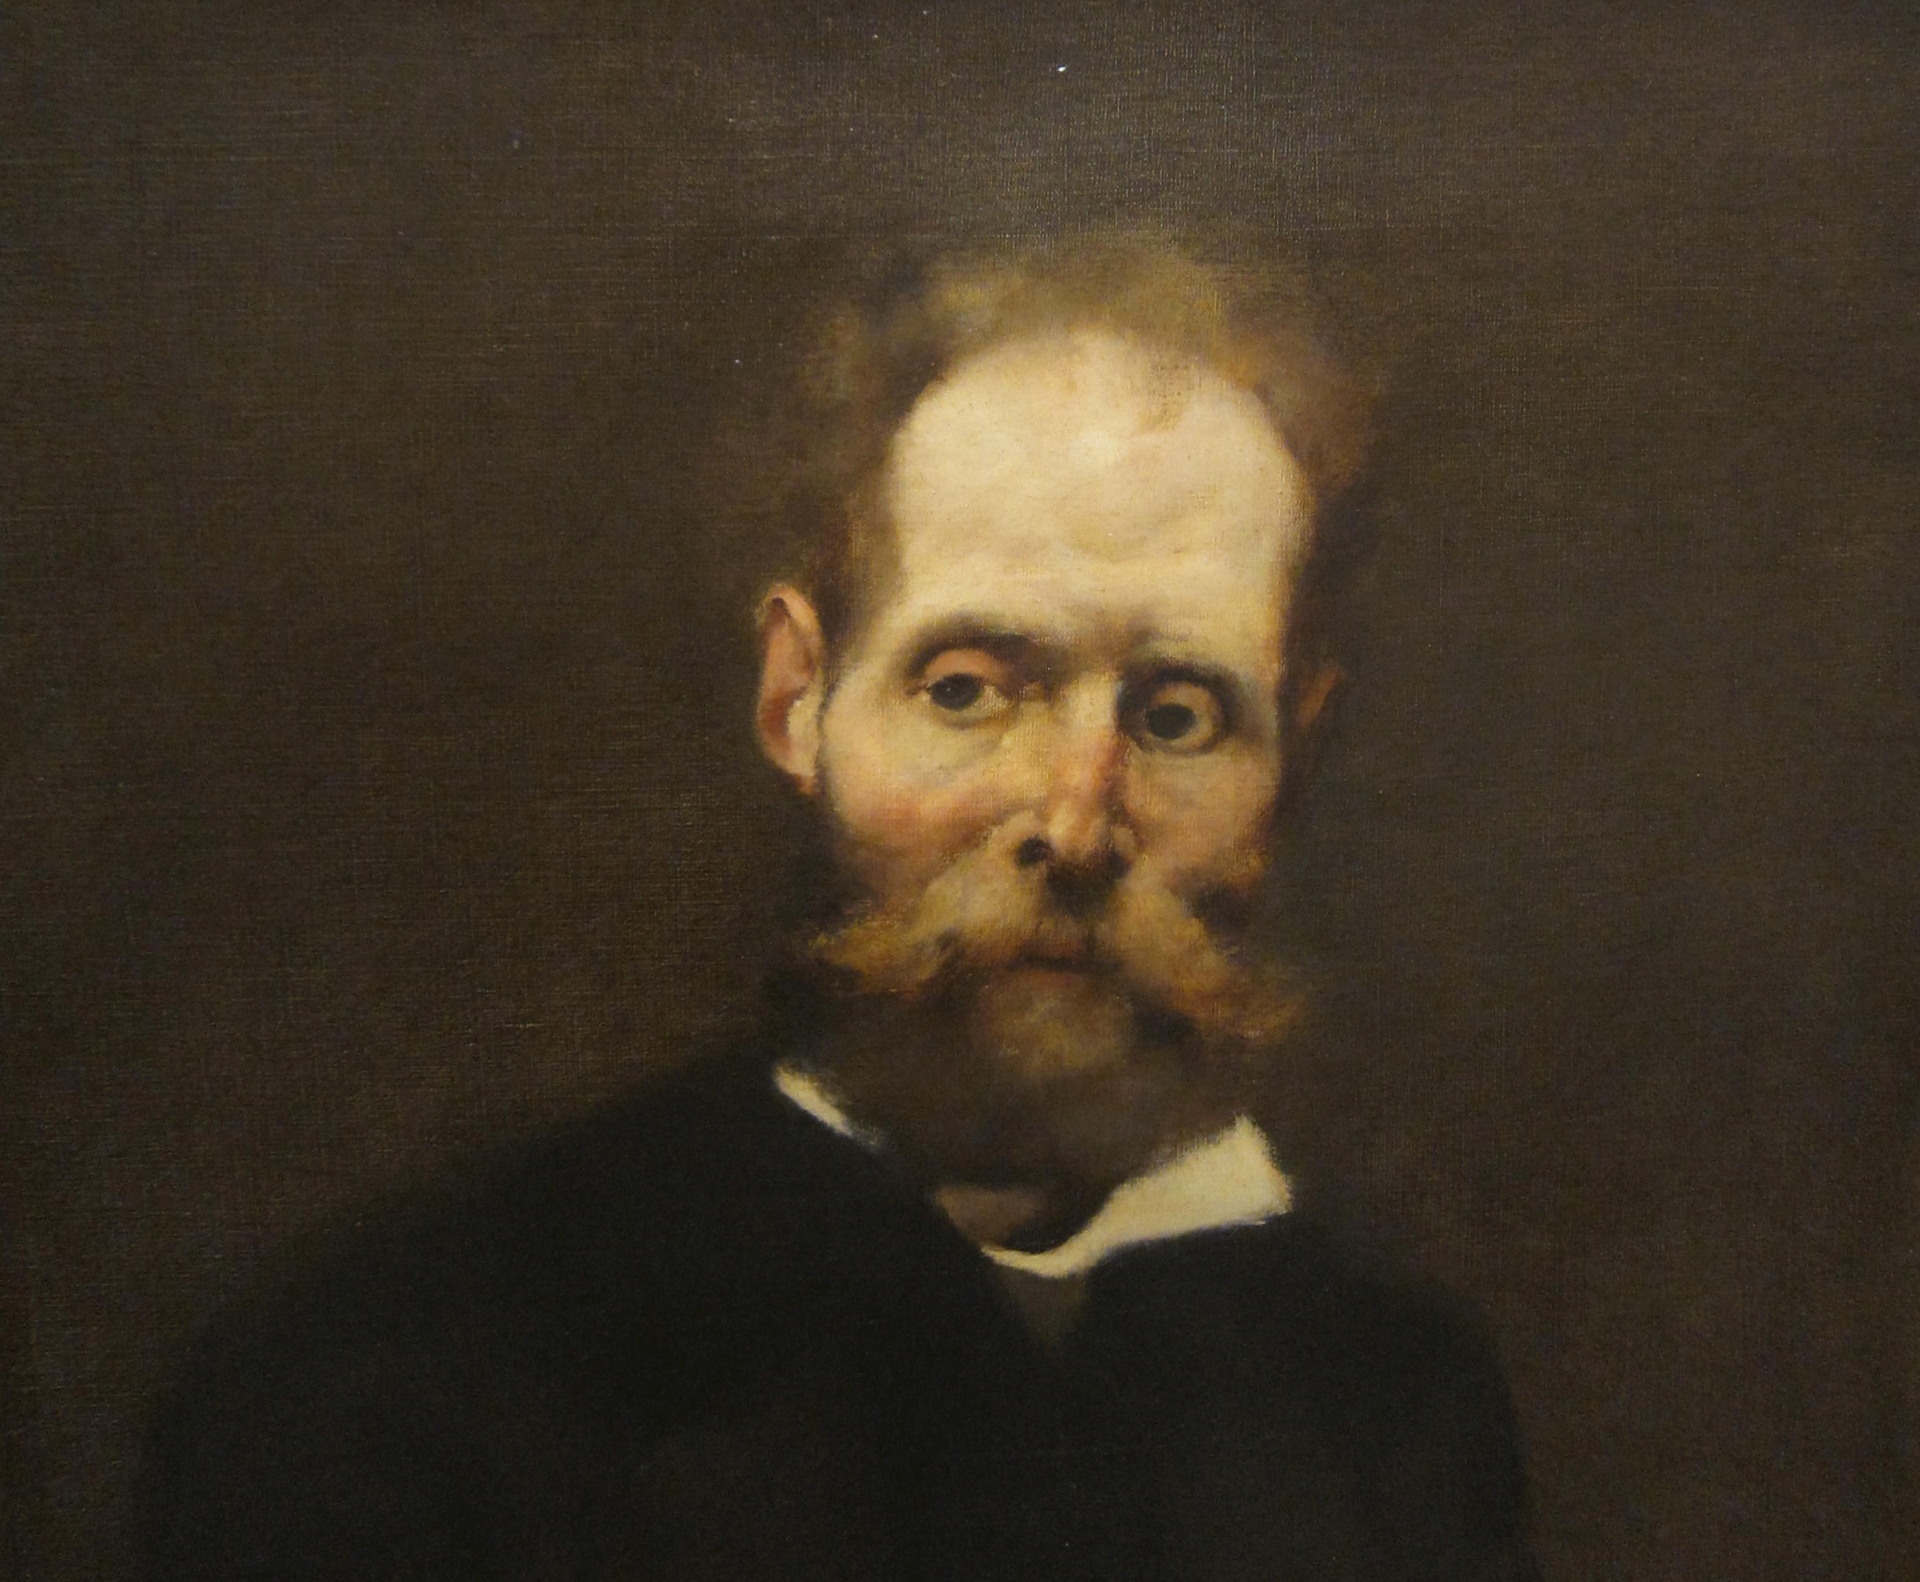 a painting of an older man with beard and suit on